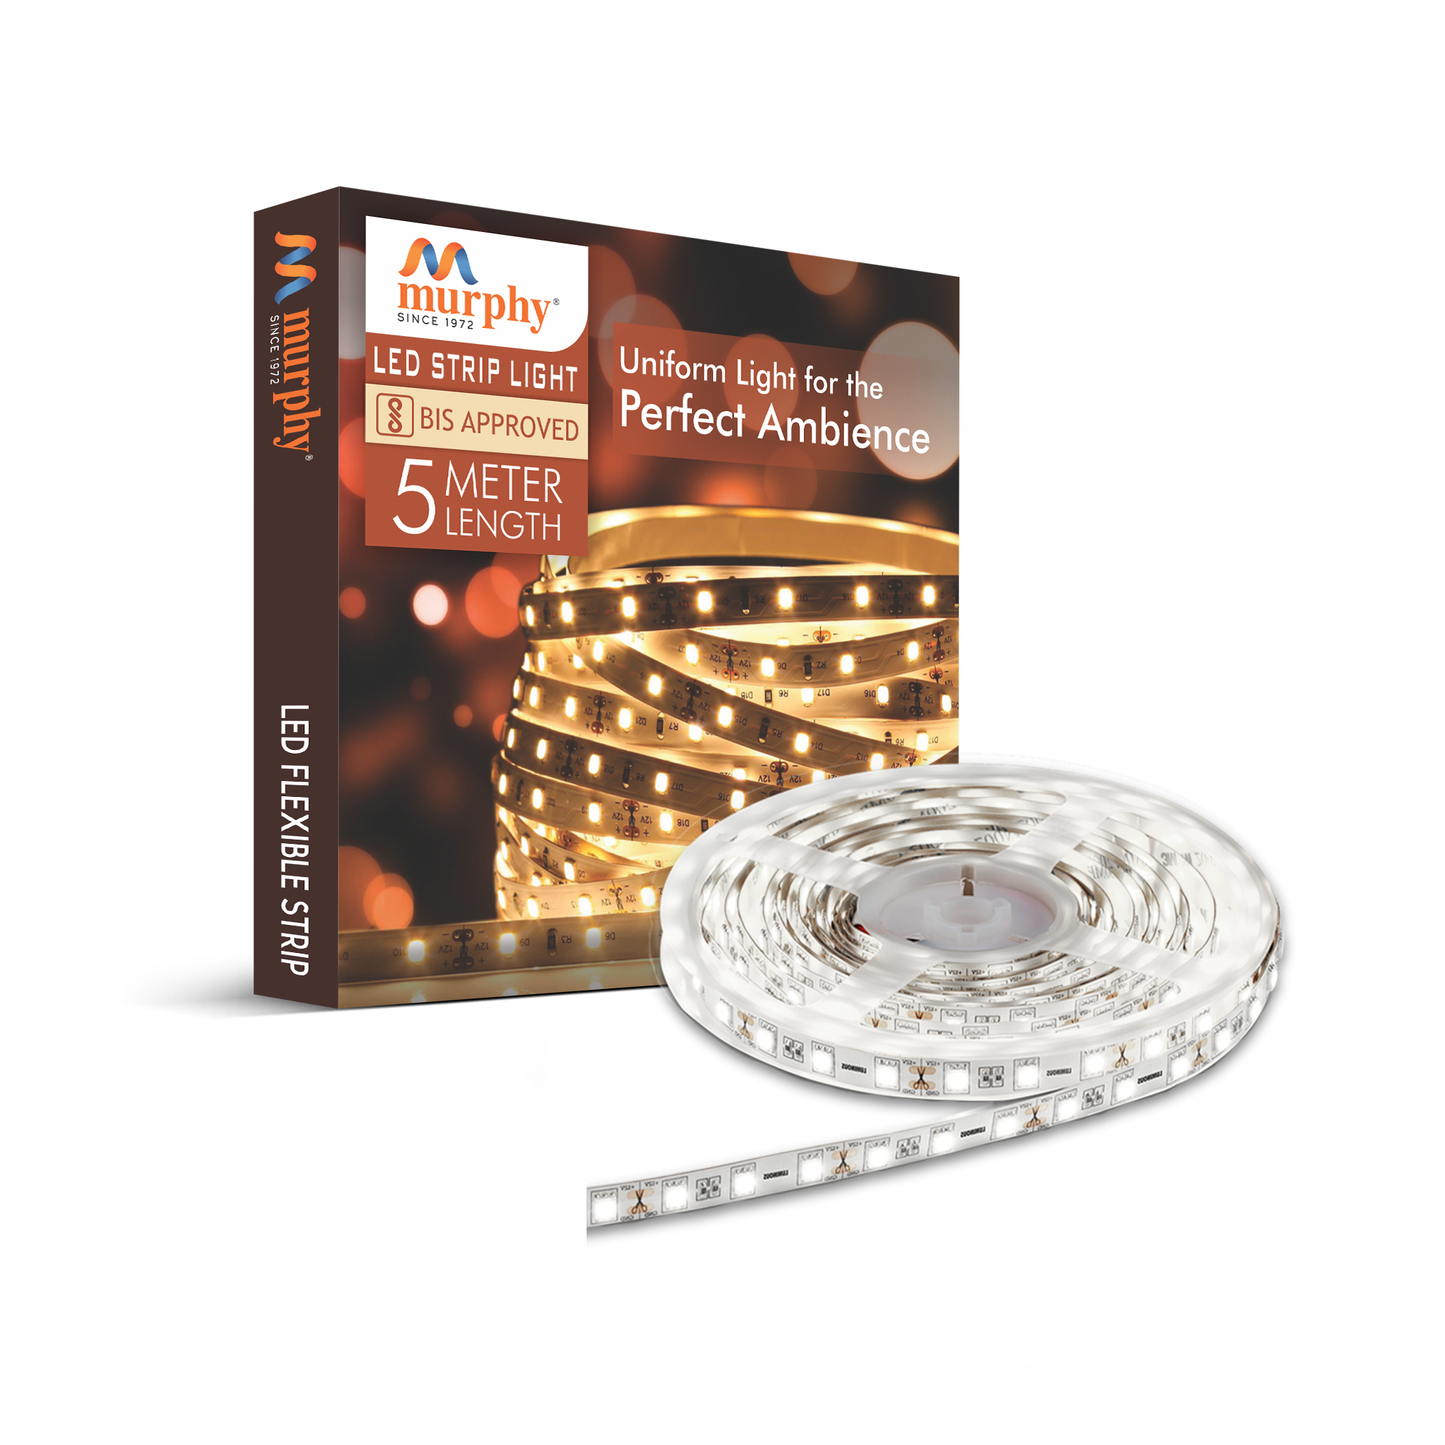 LED STRIP LIGHT 120 LED/Mtr. WITH DRIVER